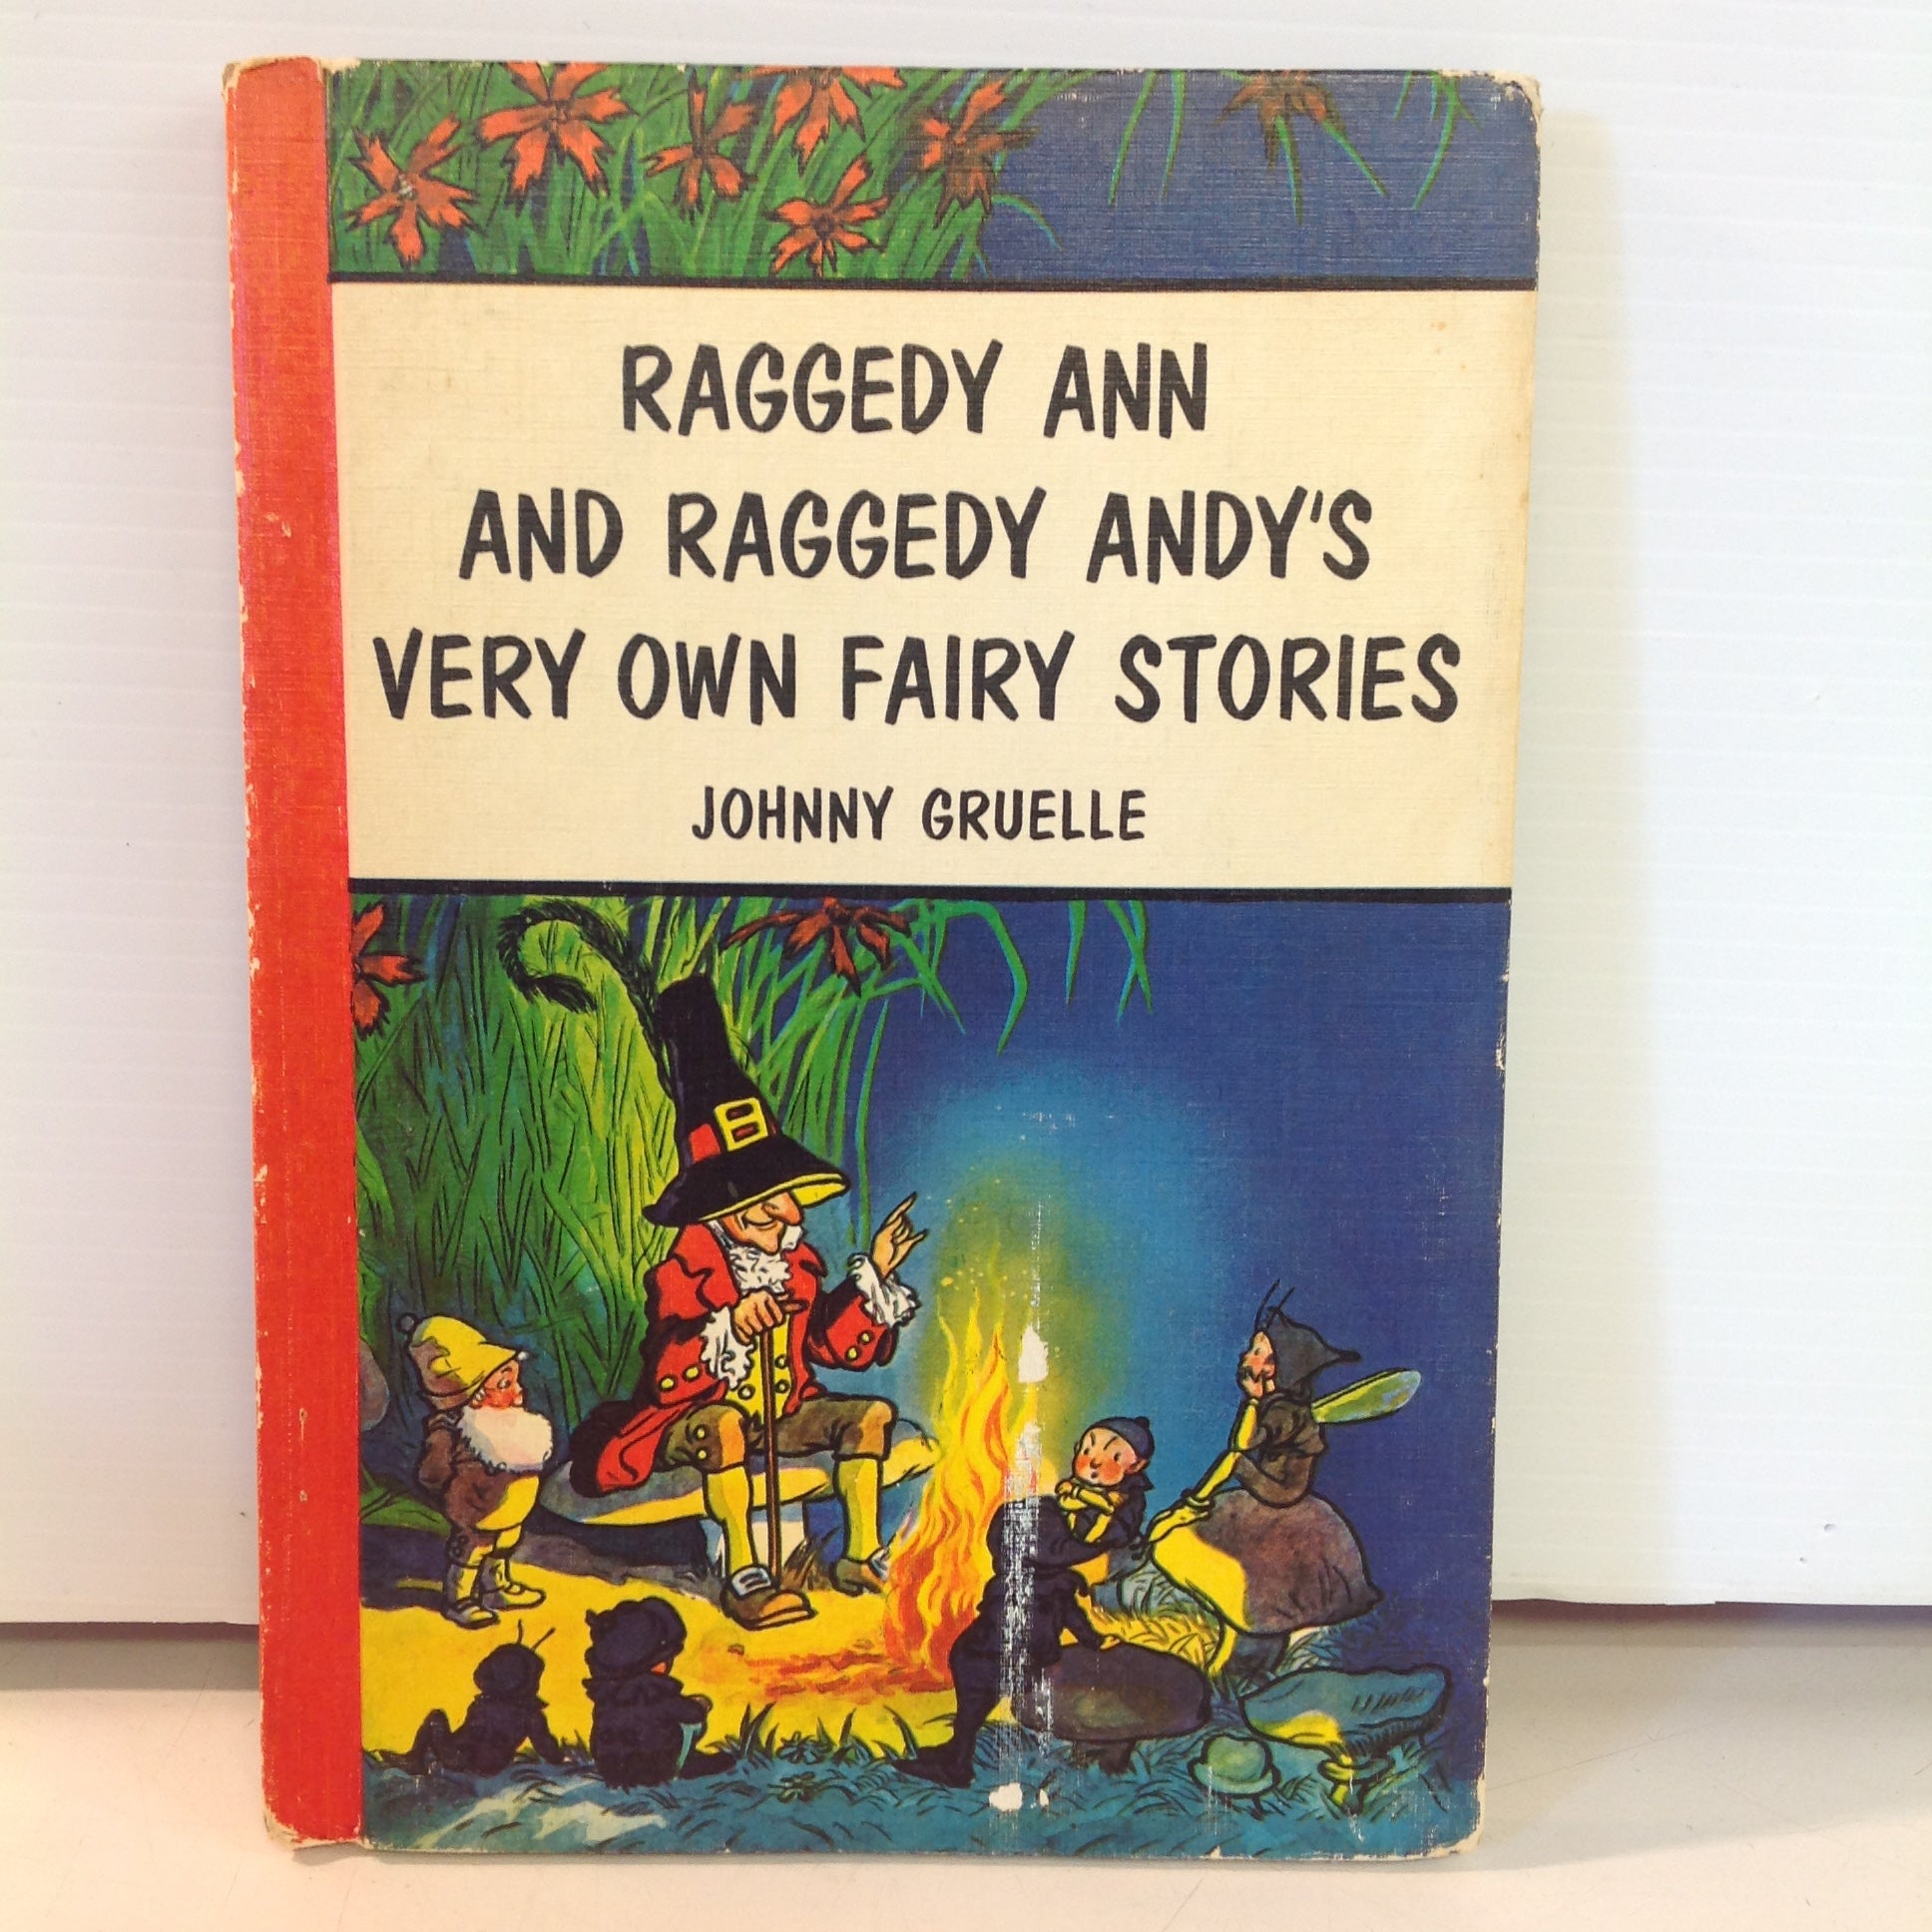 Vintage 1960 Bobbs-Merrill Hardcover Book Raggedy Ann and Raggedy Andy's Very Own Fairy Stories  by Johnny Gruelle